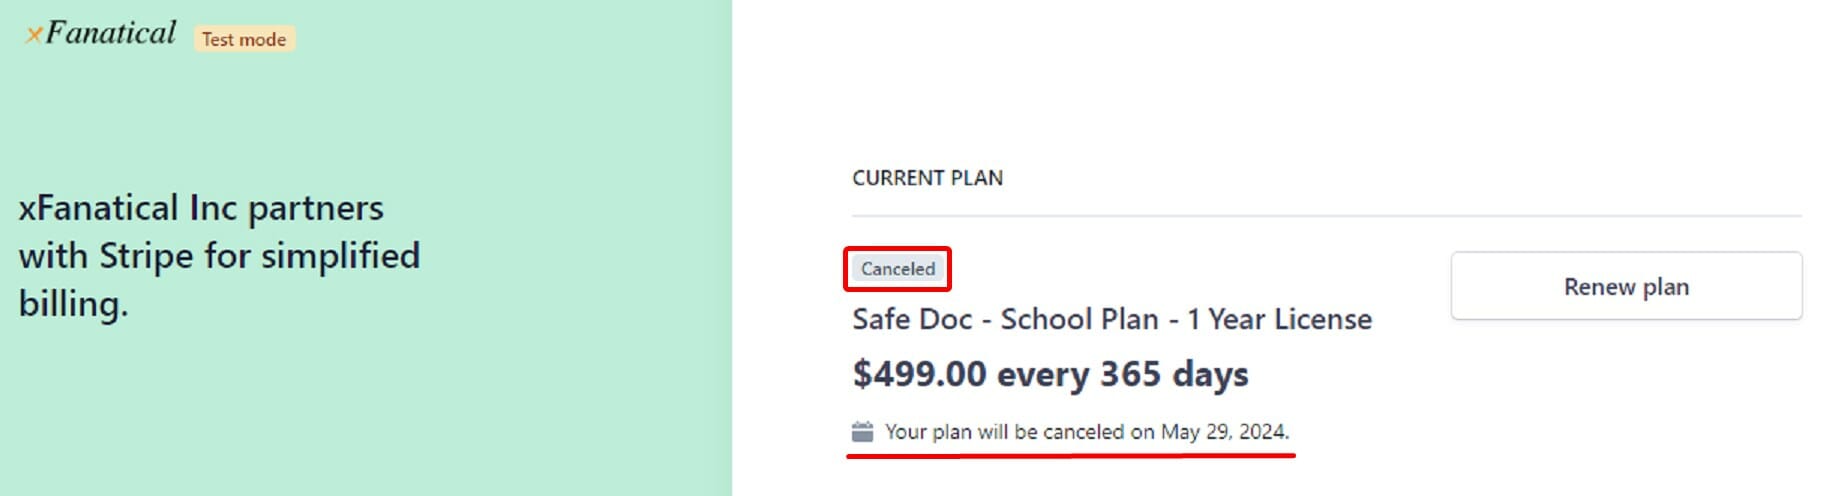 plan will be canceled on some date